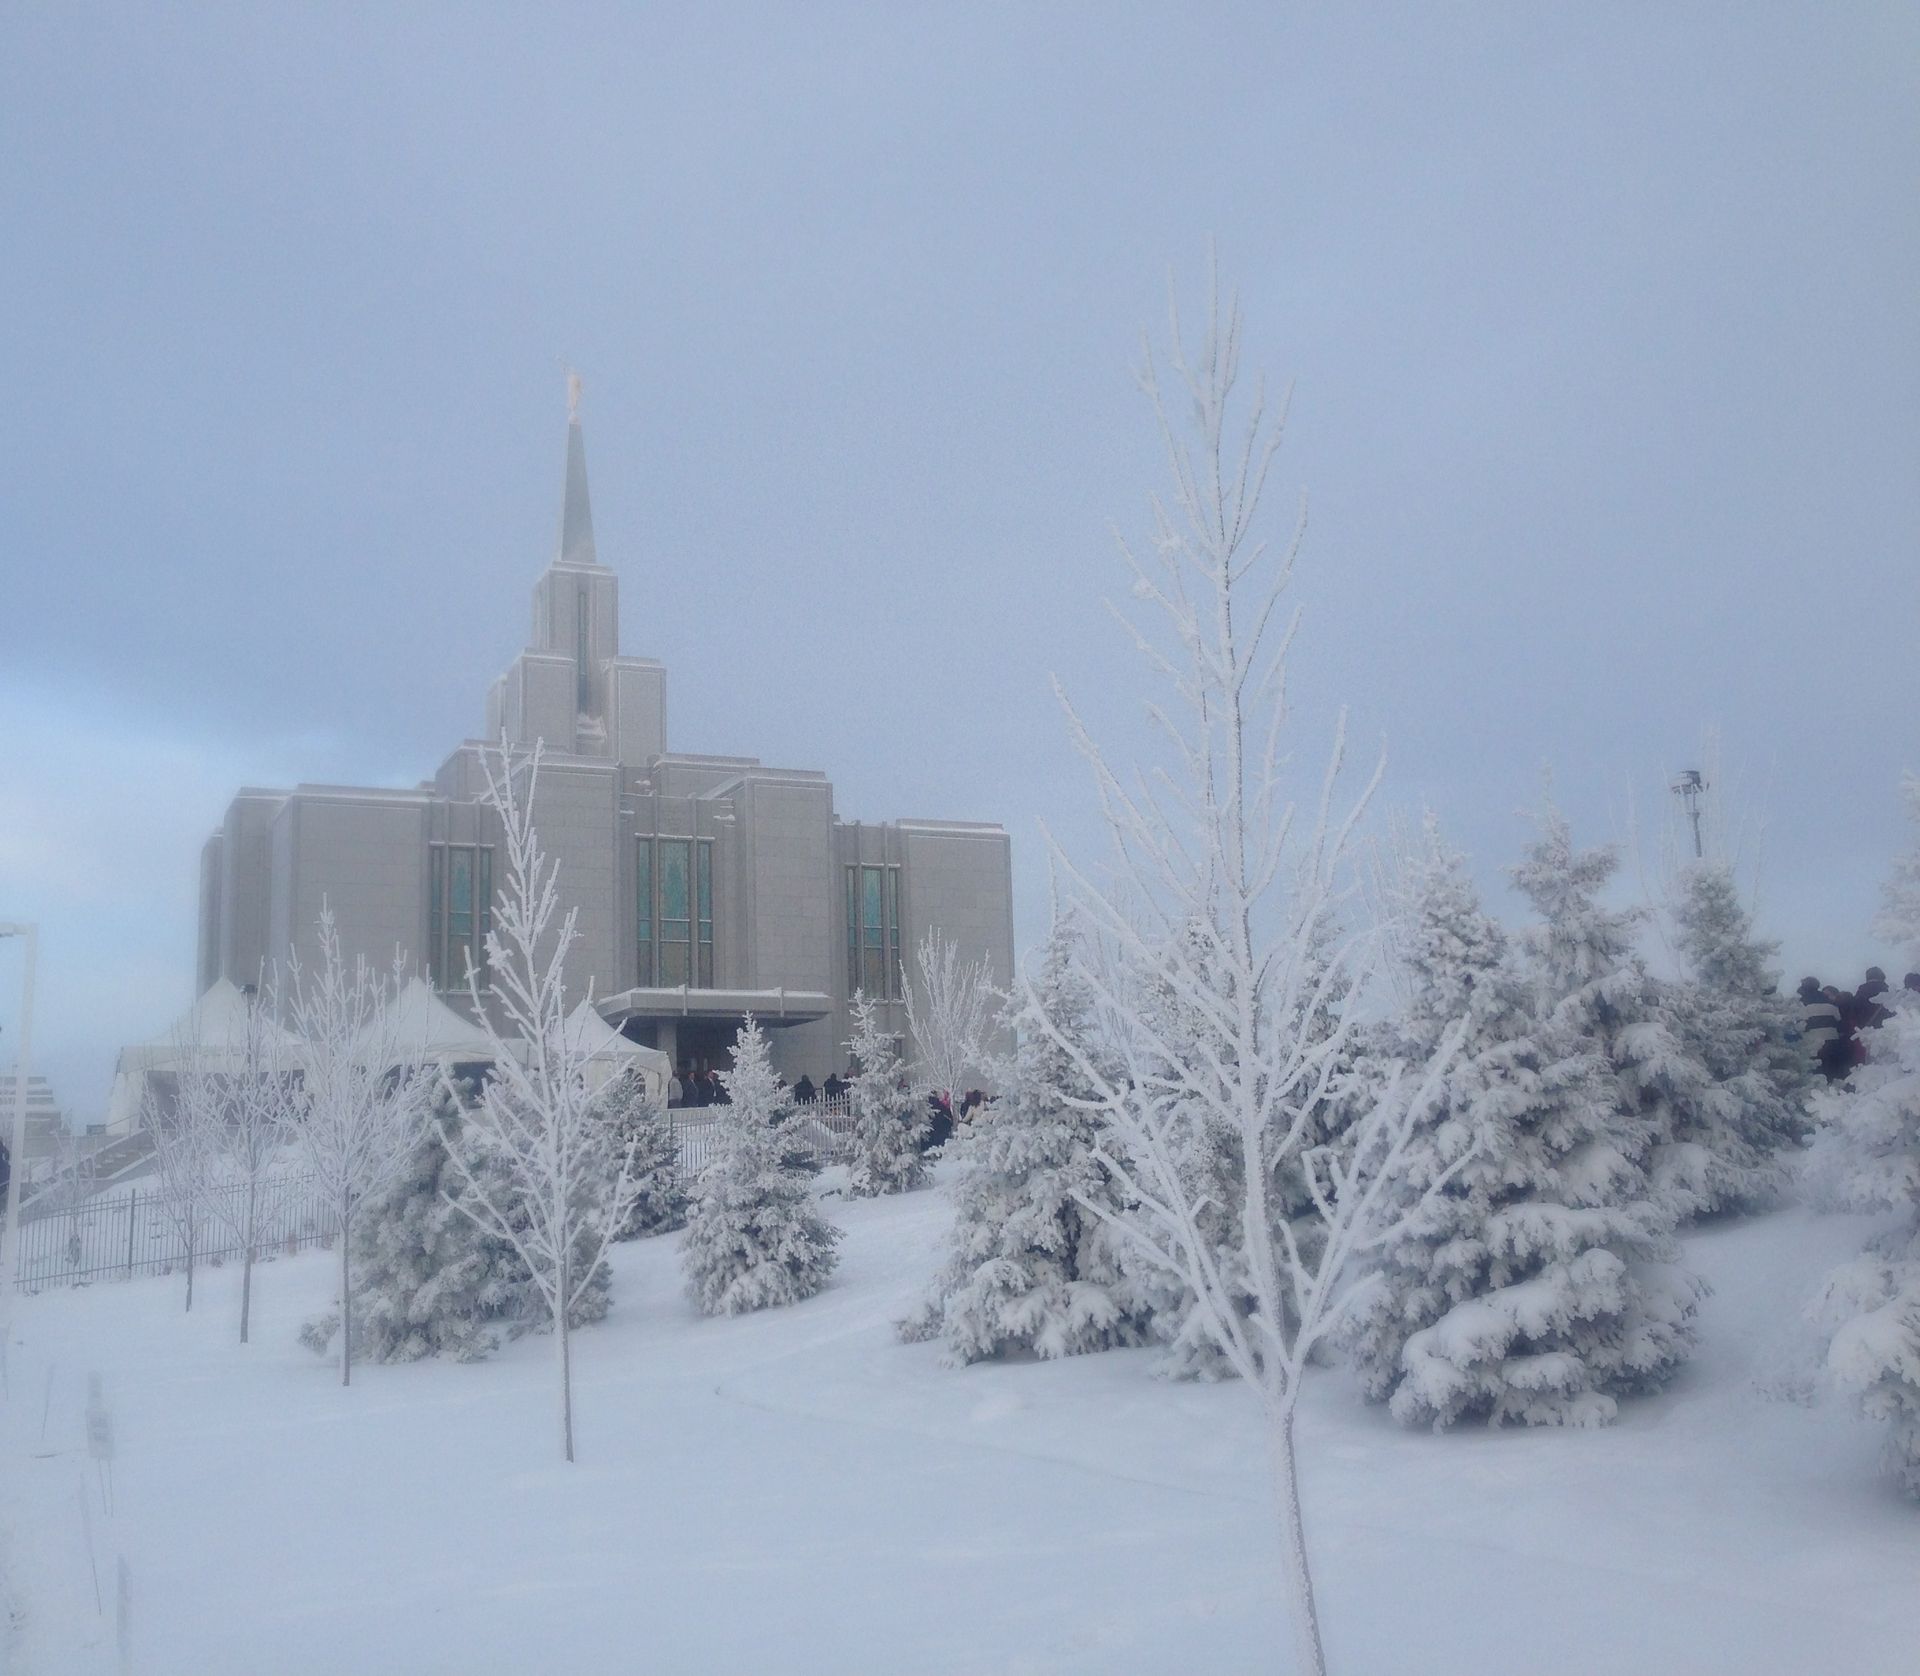 The Calgary Alberta Temple and grounds during the winter.